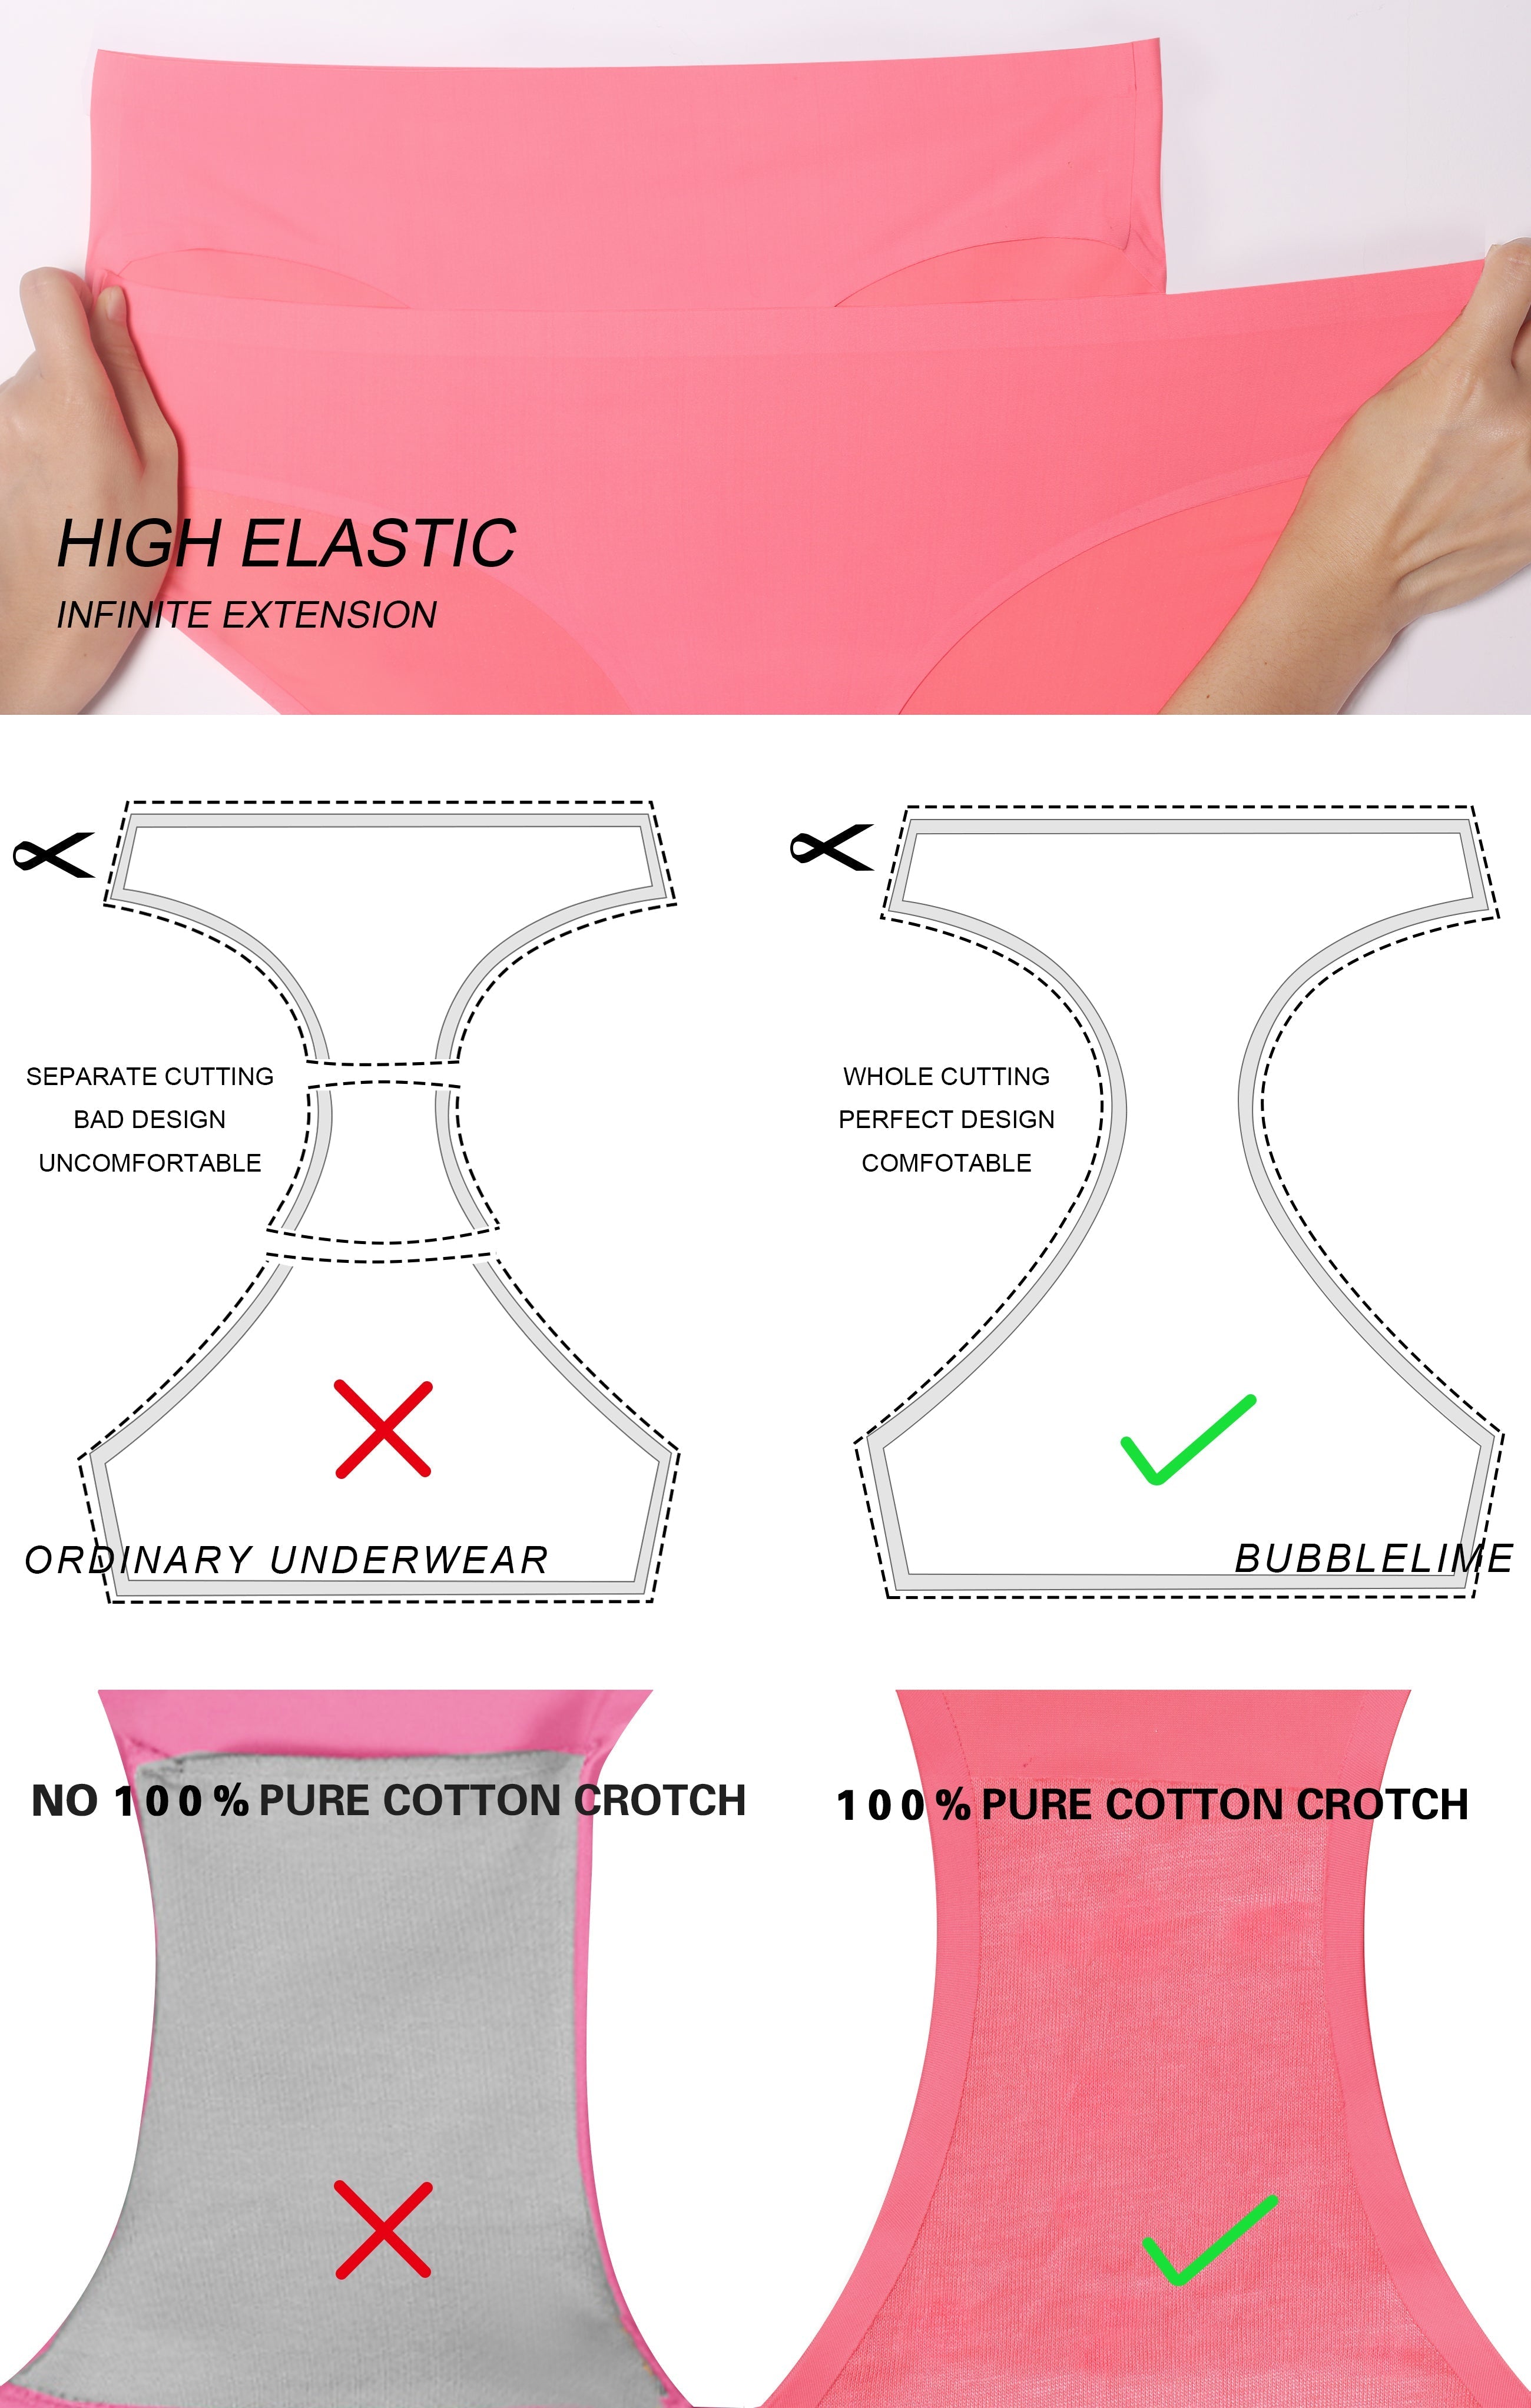 Invisibles Sport Bikini Panties skin Sleek, soft, smooth and totally comfortable: our newest bikini style is here. High elasticity High density Softest-ever fabric Laser cutting Unsealed Comfortable No panty lines Machine wash 95% Nylon, 5% Spandex